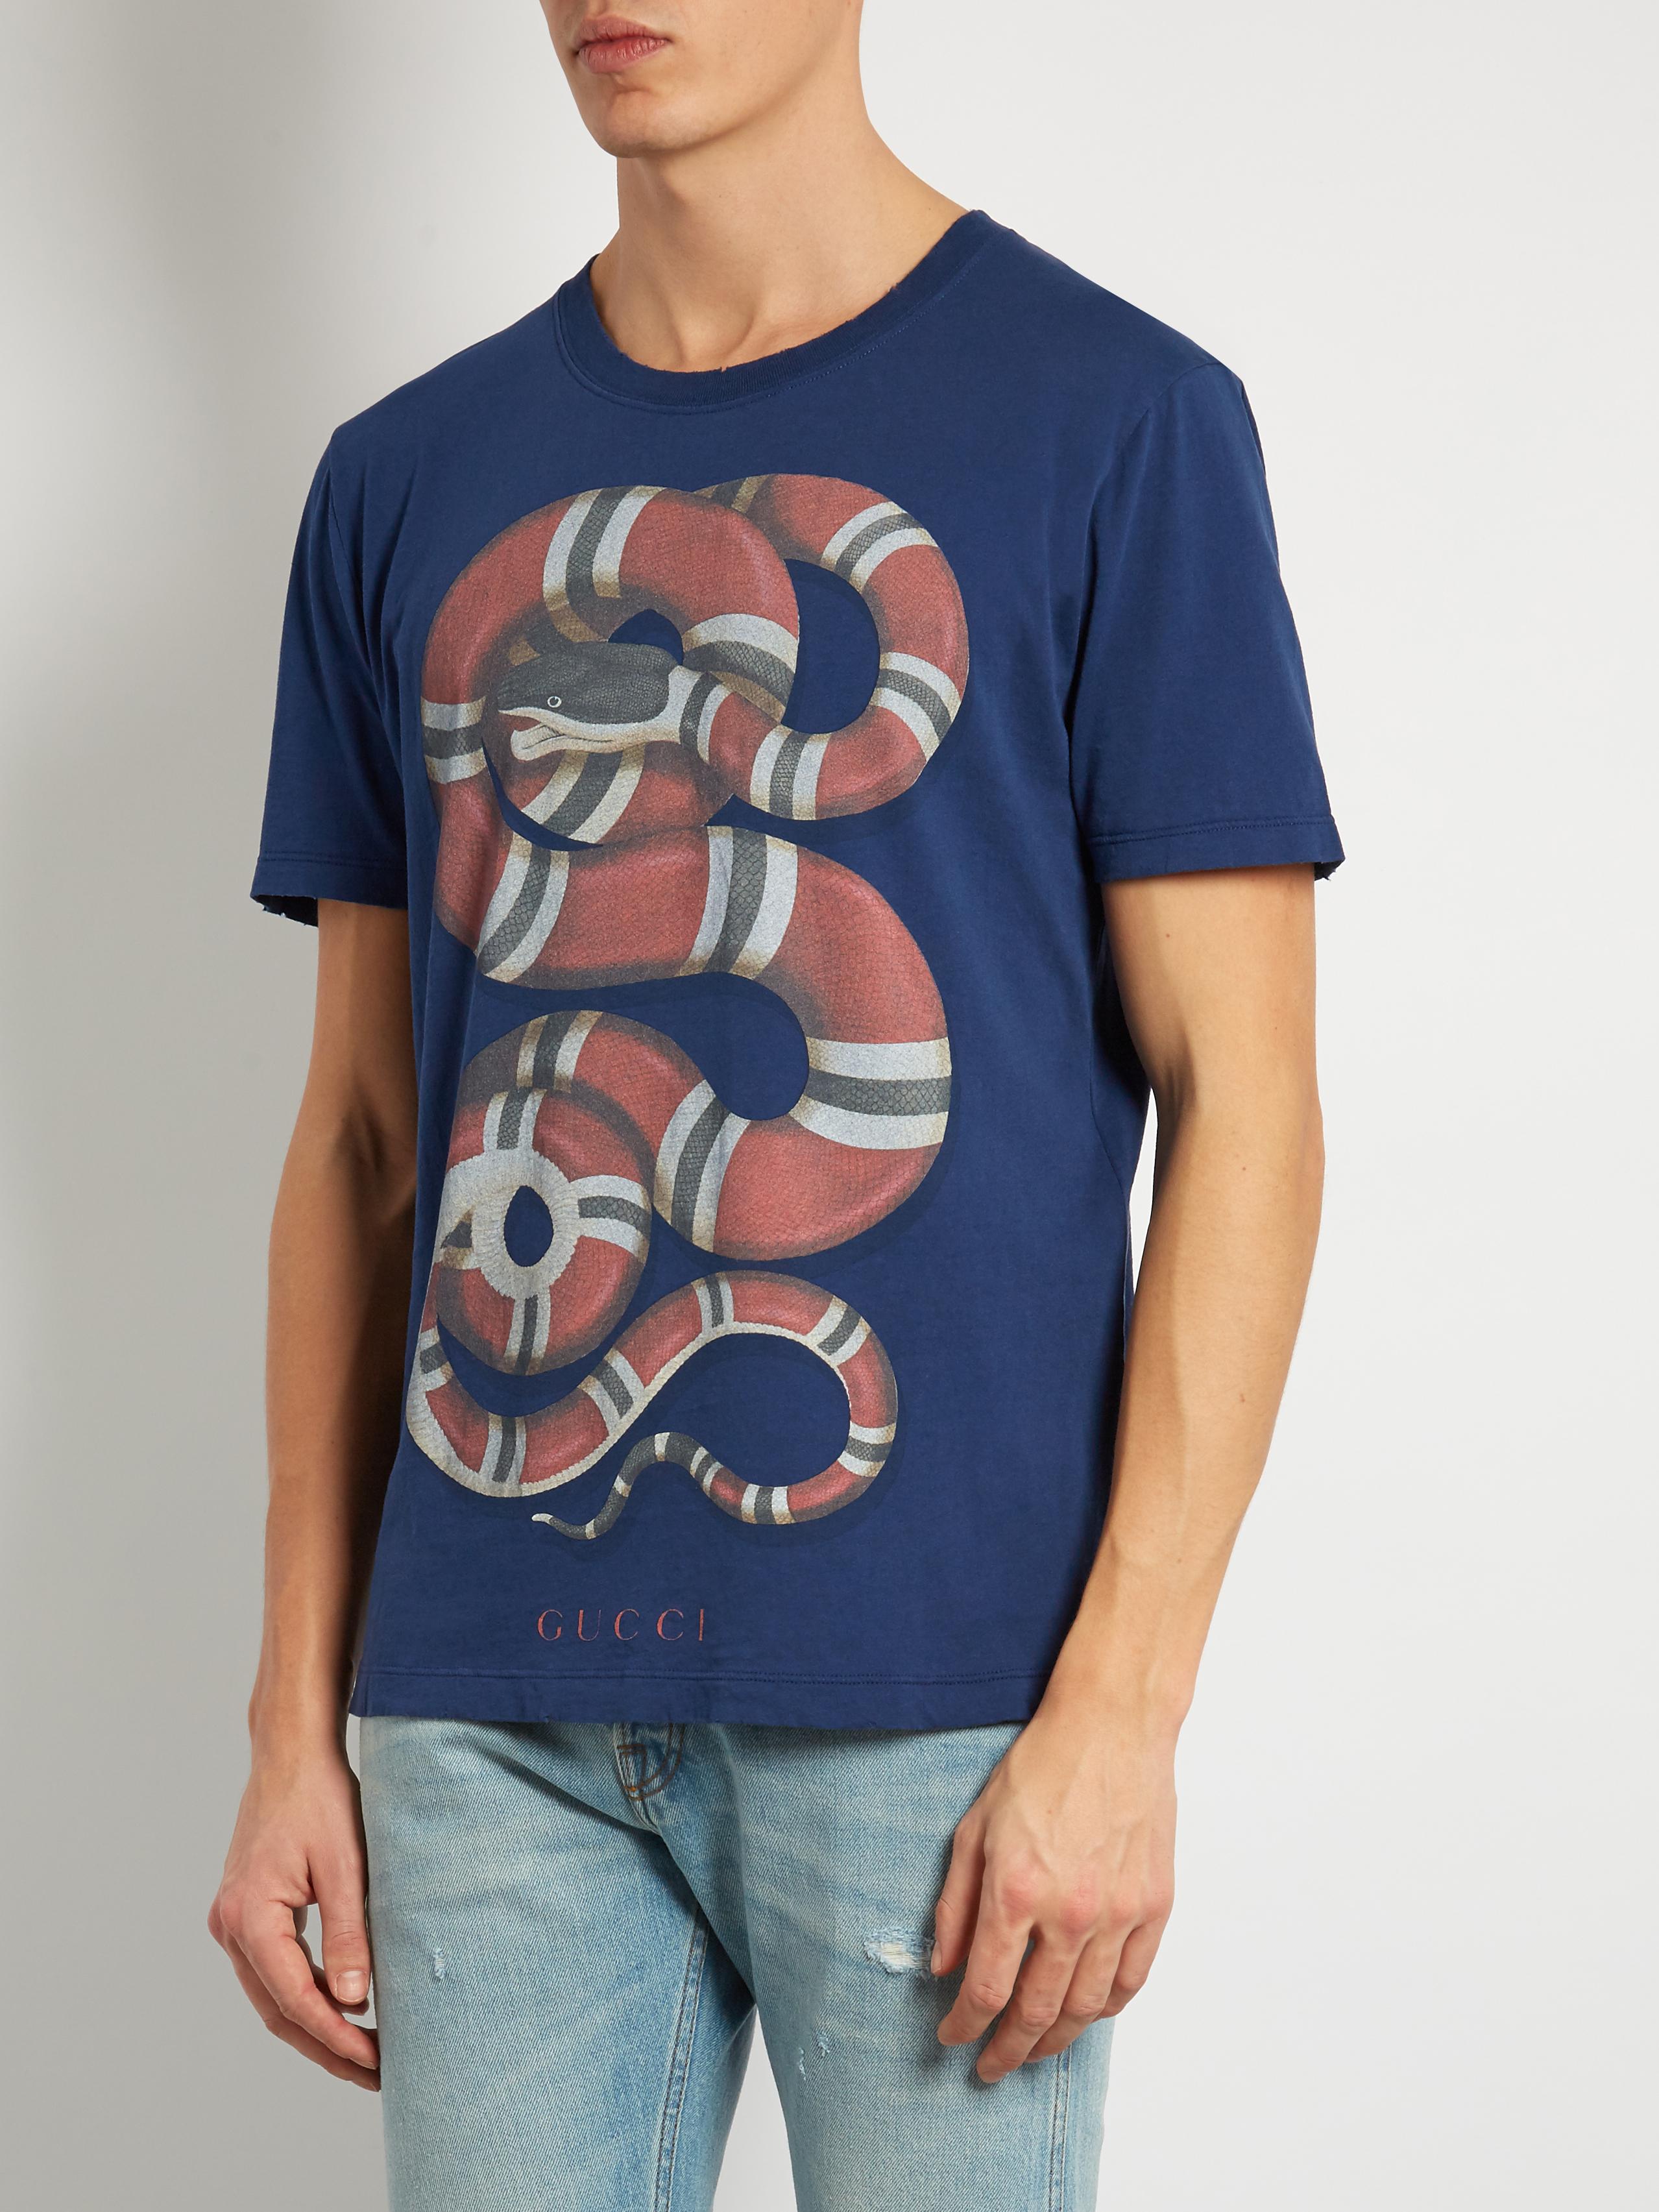 Gucci Cotton Snake Print T-shirt in Blue for Men - Lyst